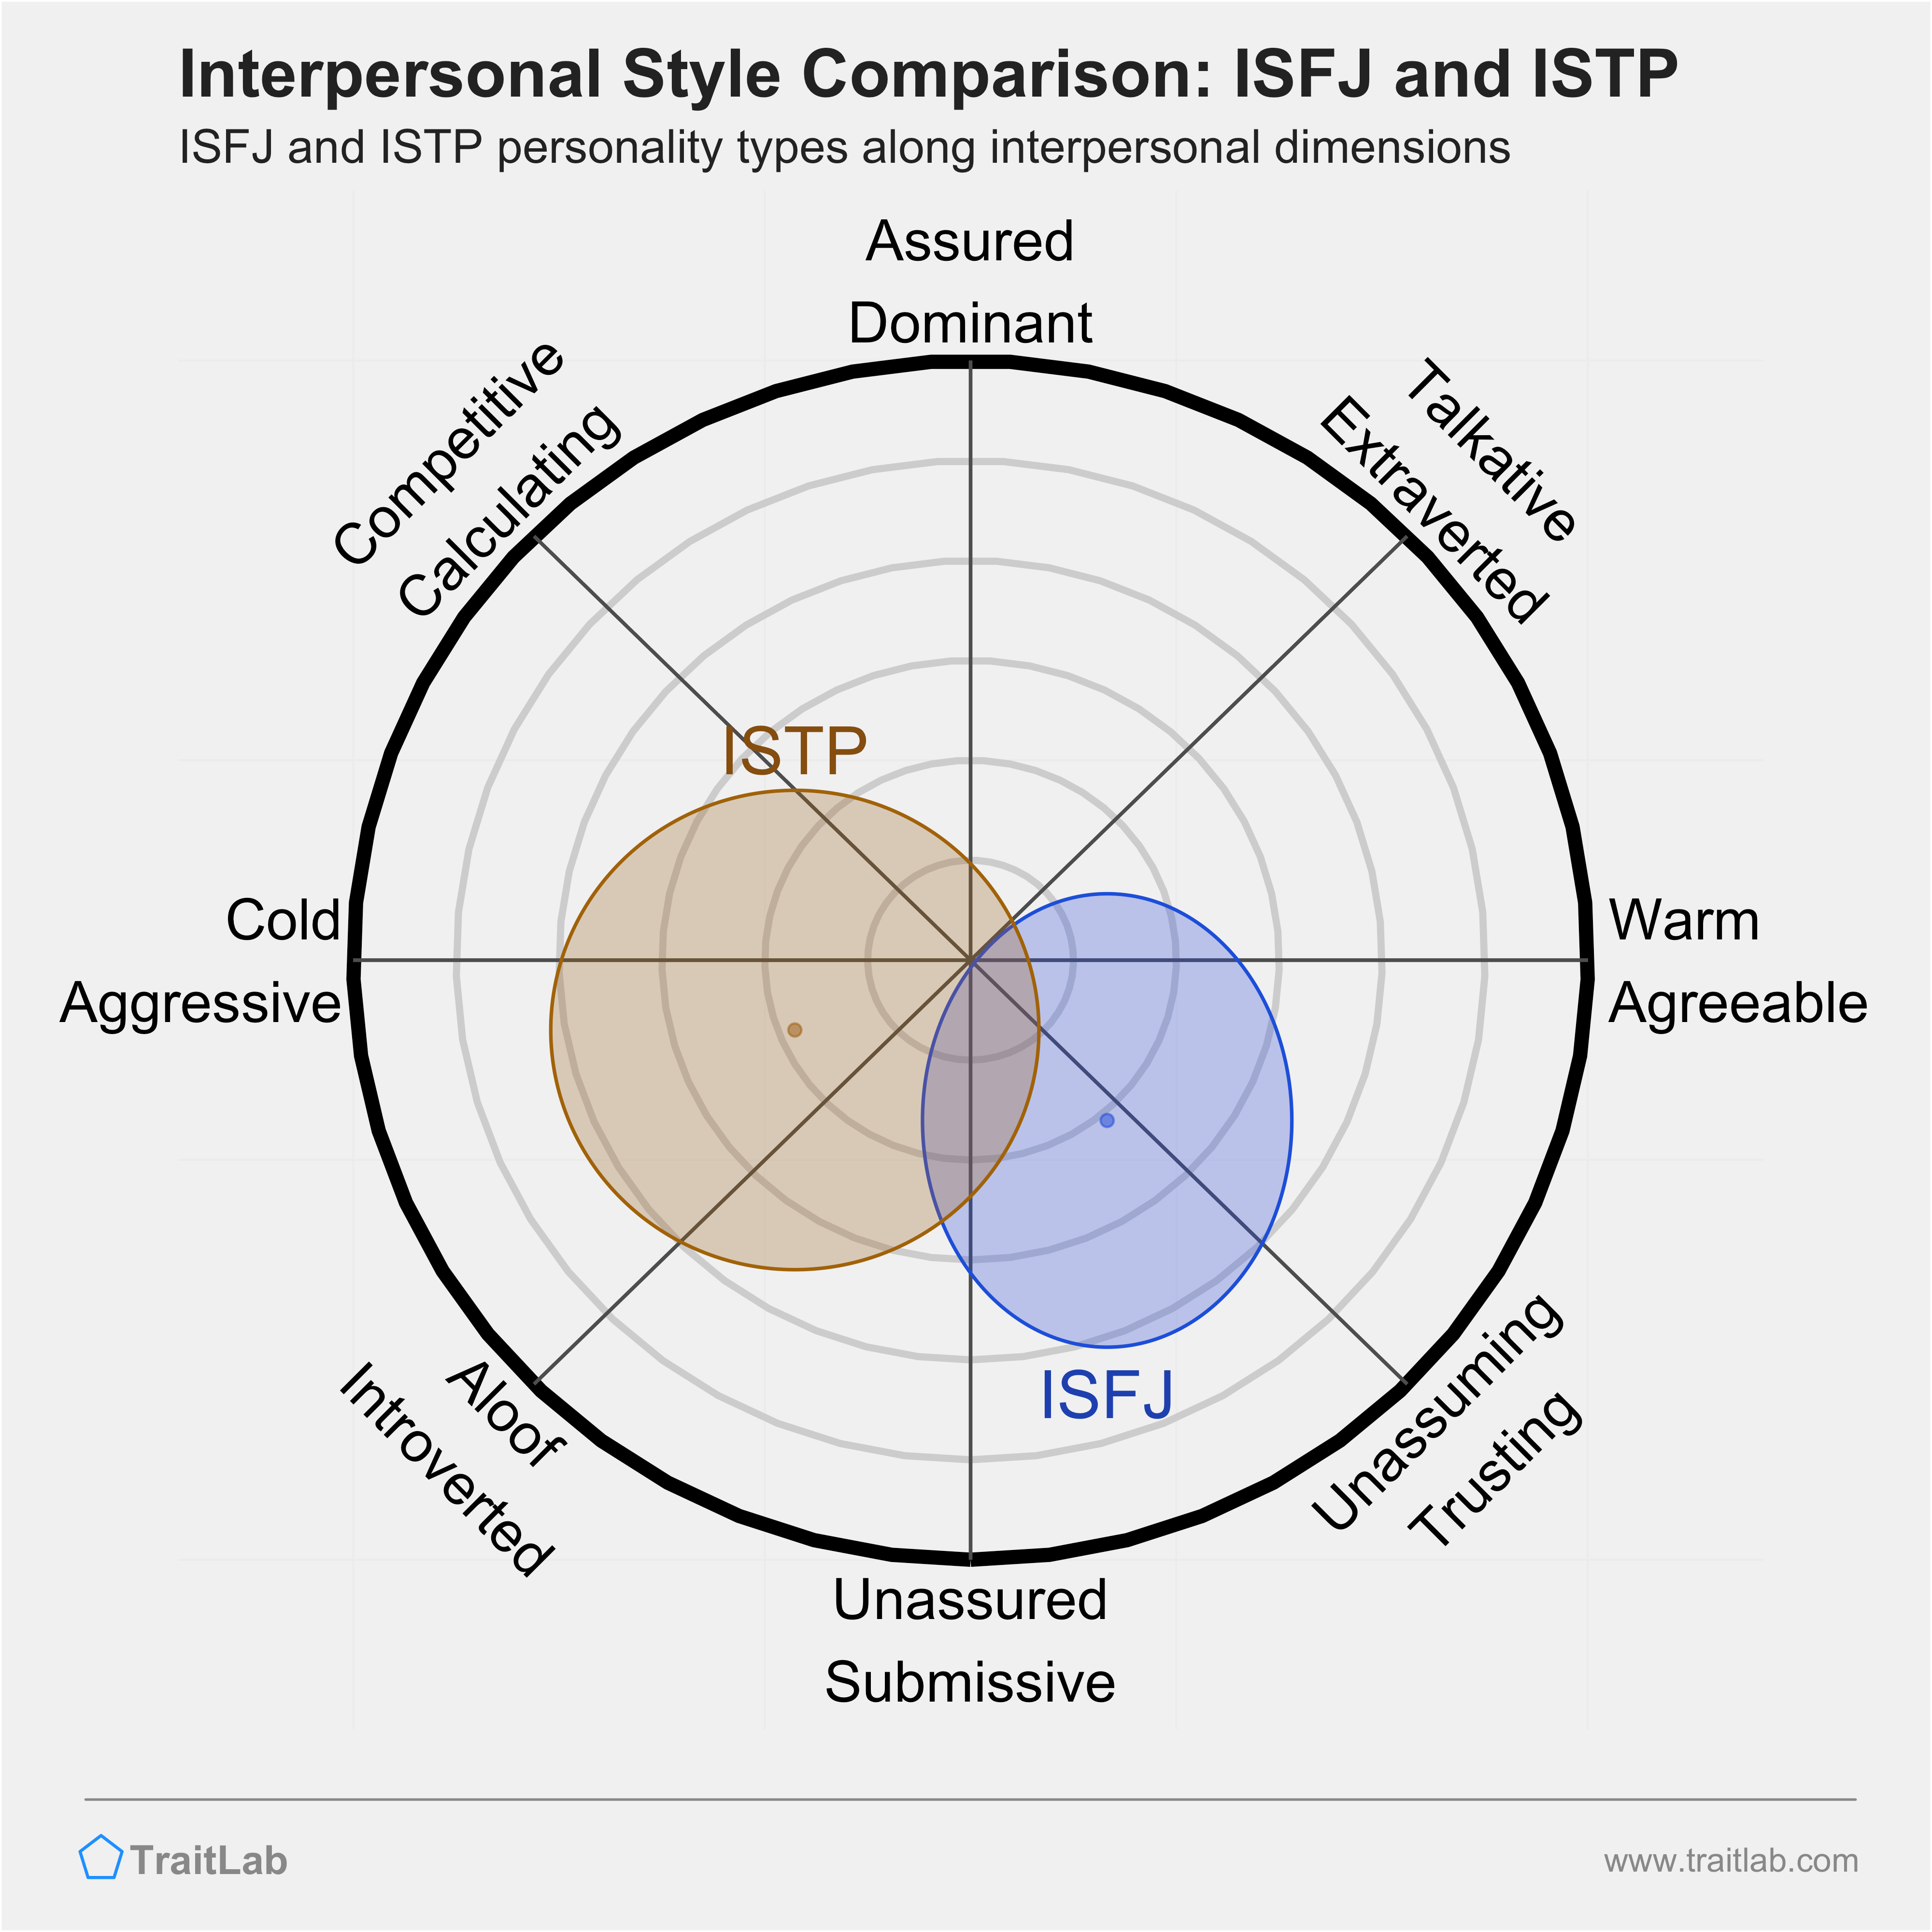 ISFJ and ISTP comparison across interpersonal dimensions